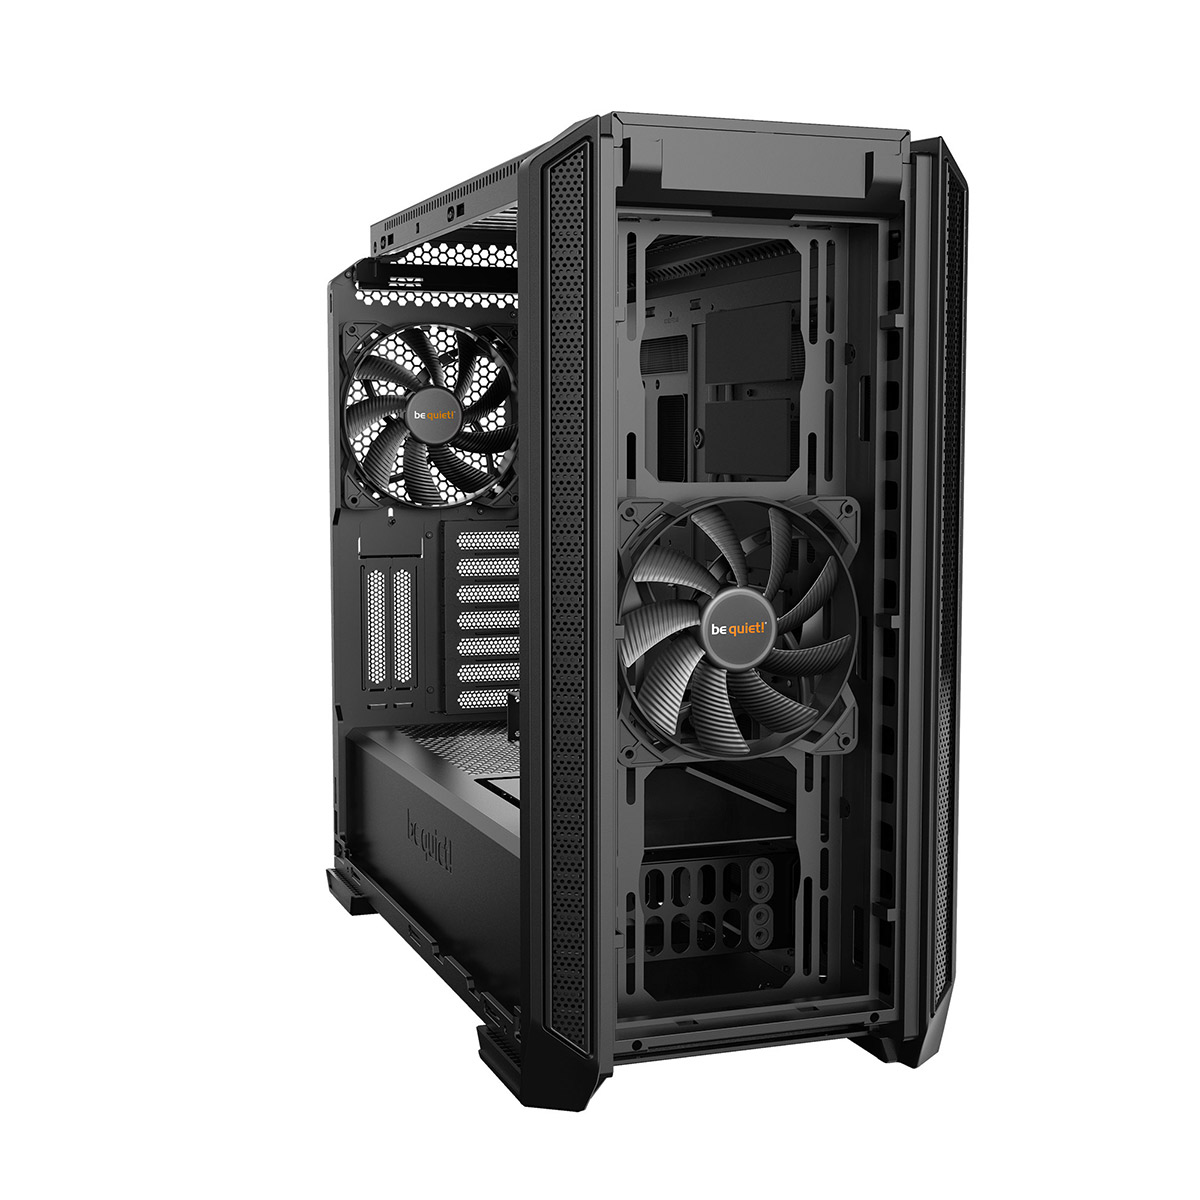 be quiet! - B Grade be quiet! Silent Base 601 Midi-Tower Case - Black Tempered Glass